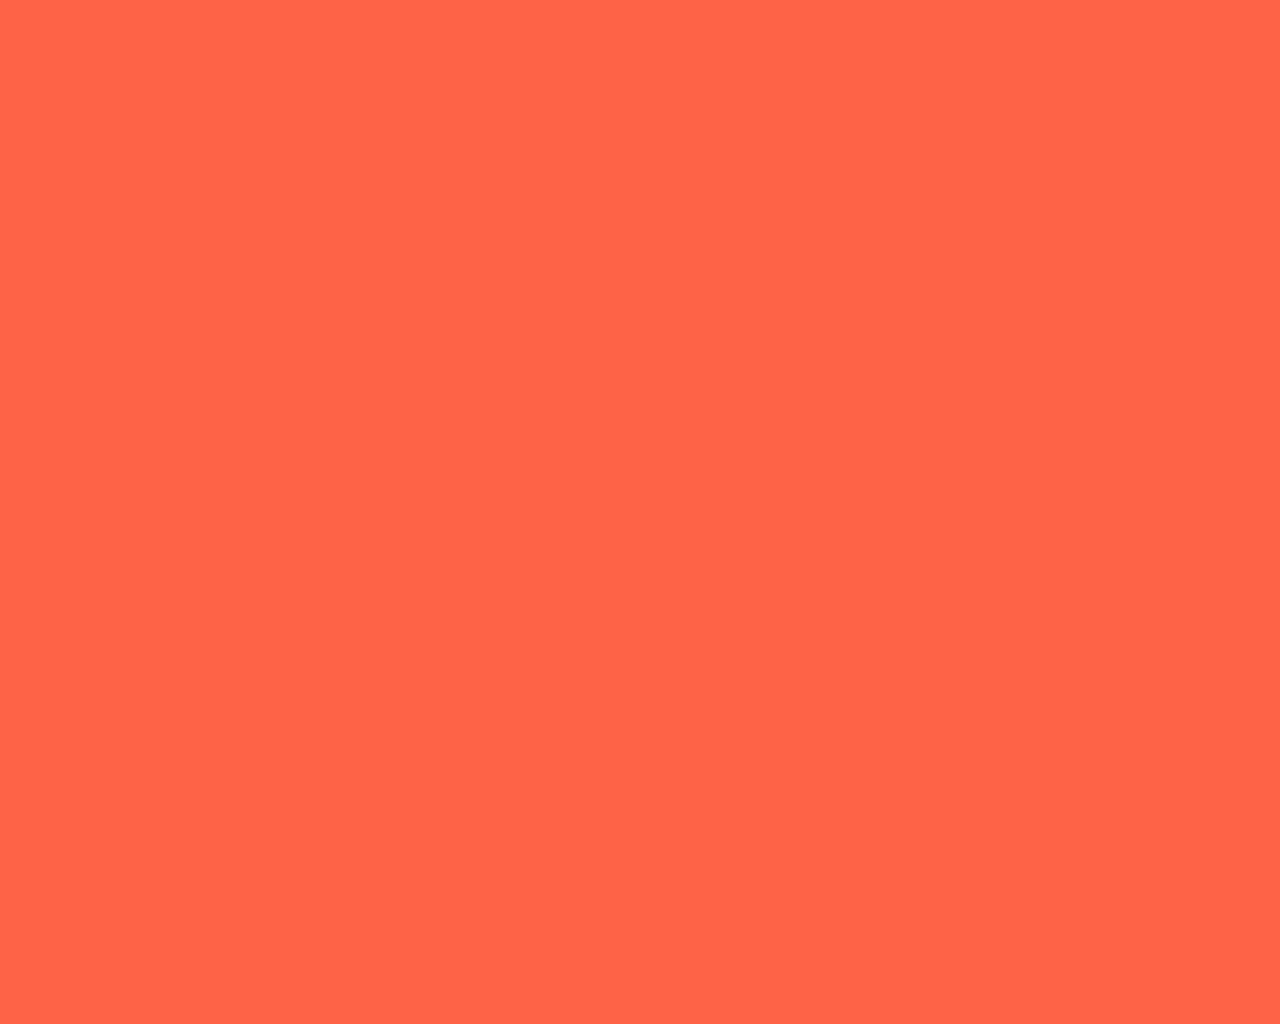 1280x1024 Tomato Solid Color Background